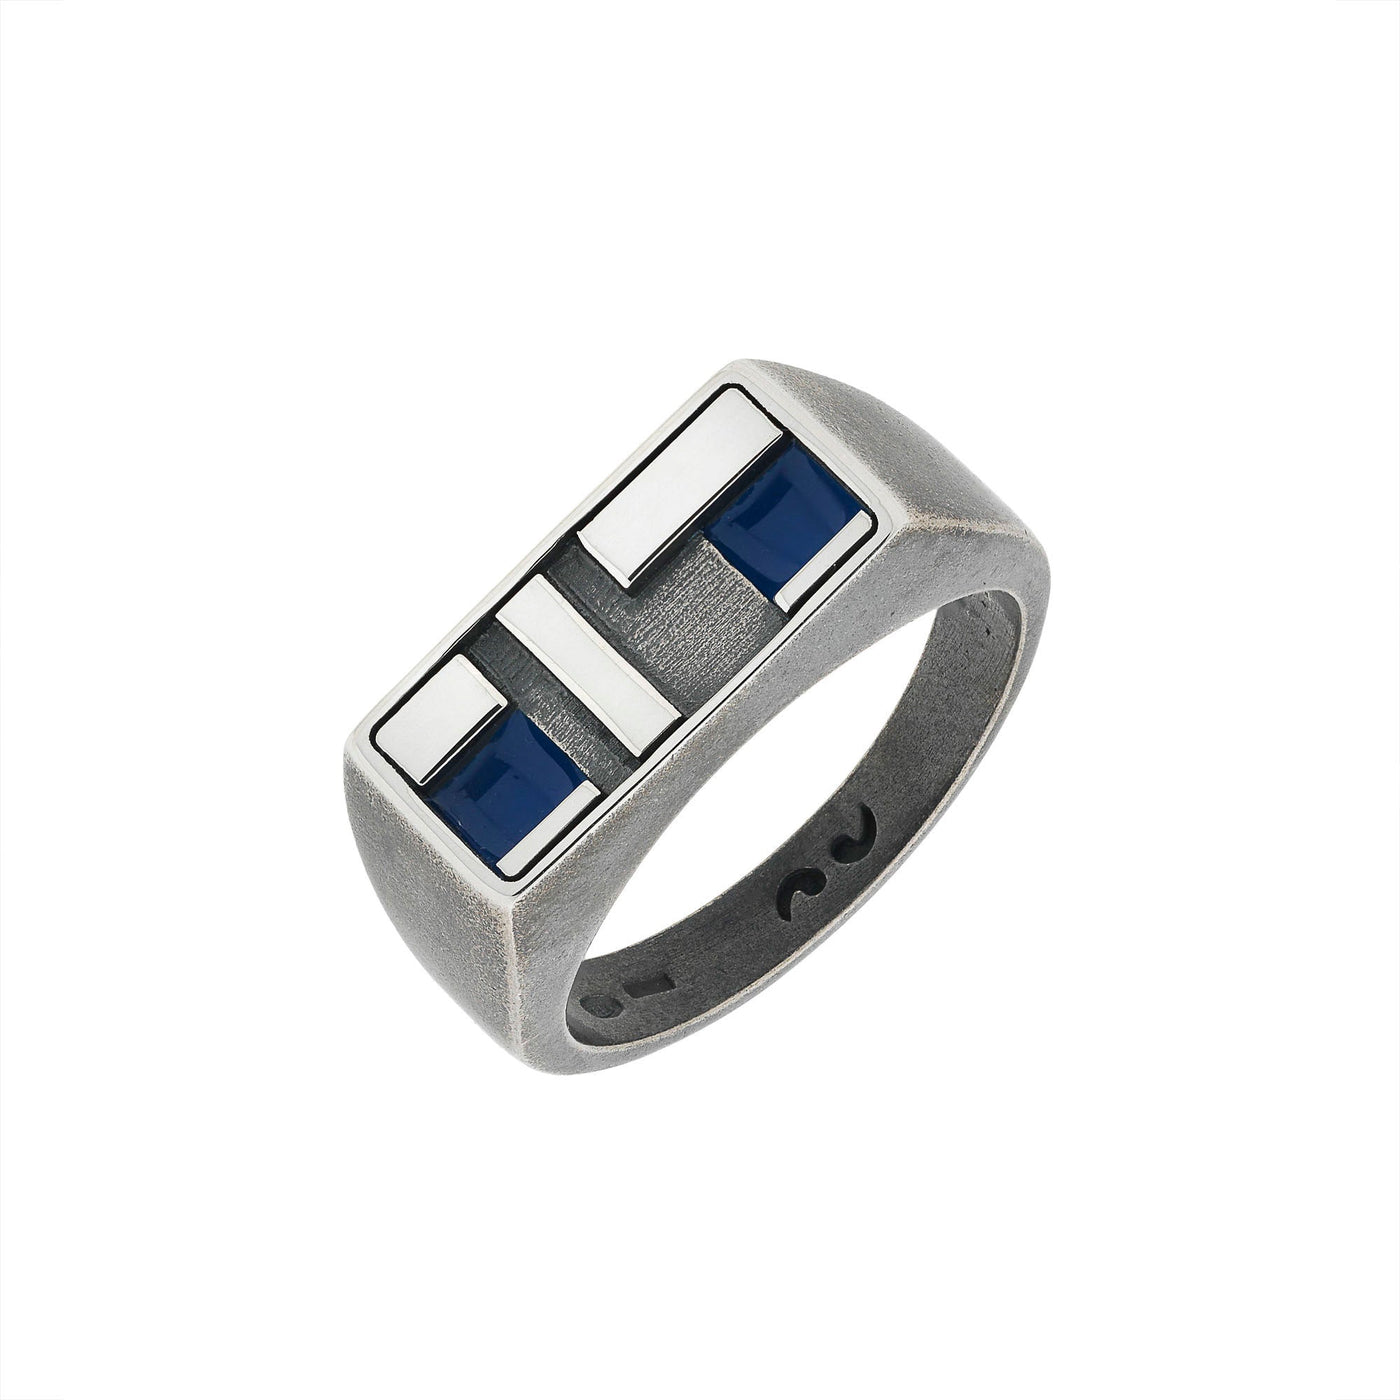 De Stijl Oxidized and Polished Silver Ring with Blue Enamel